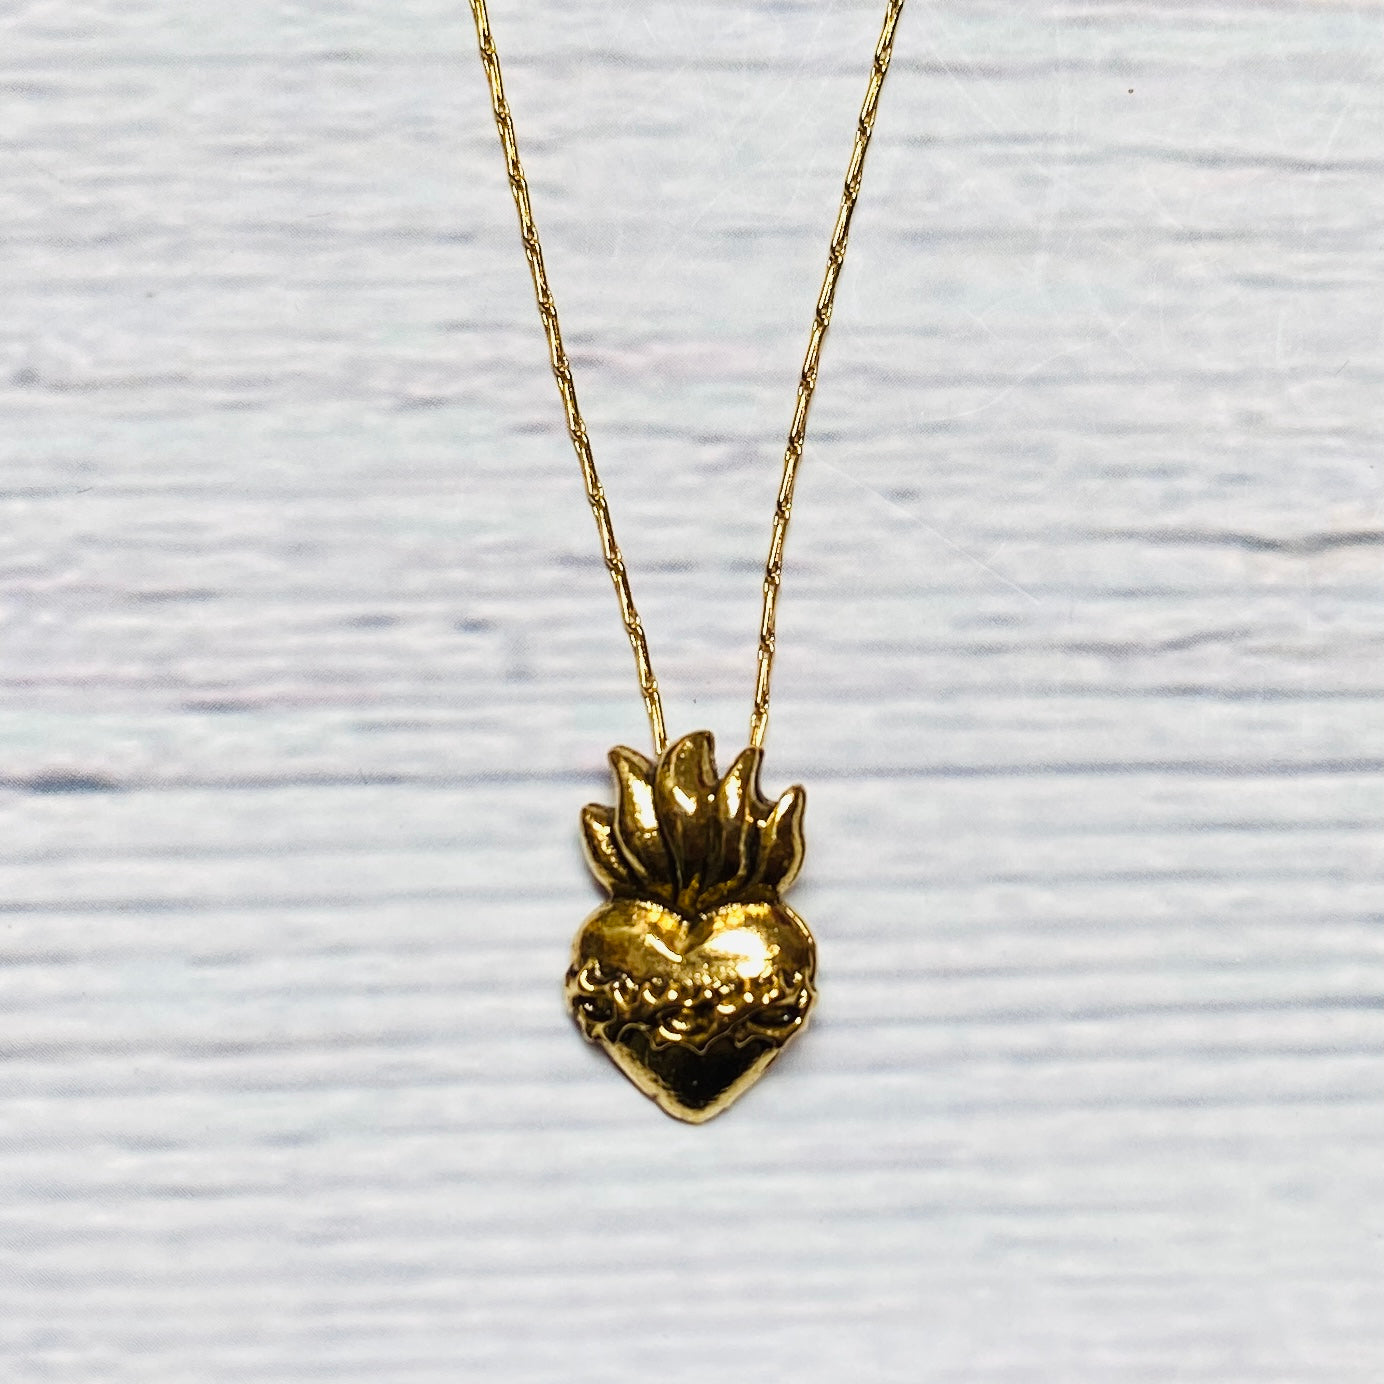 Sacred heart necklace in gold plated brass.